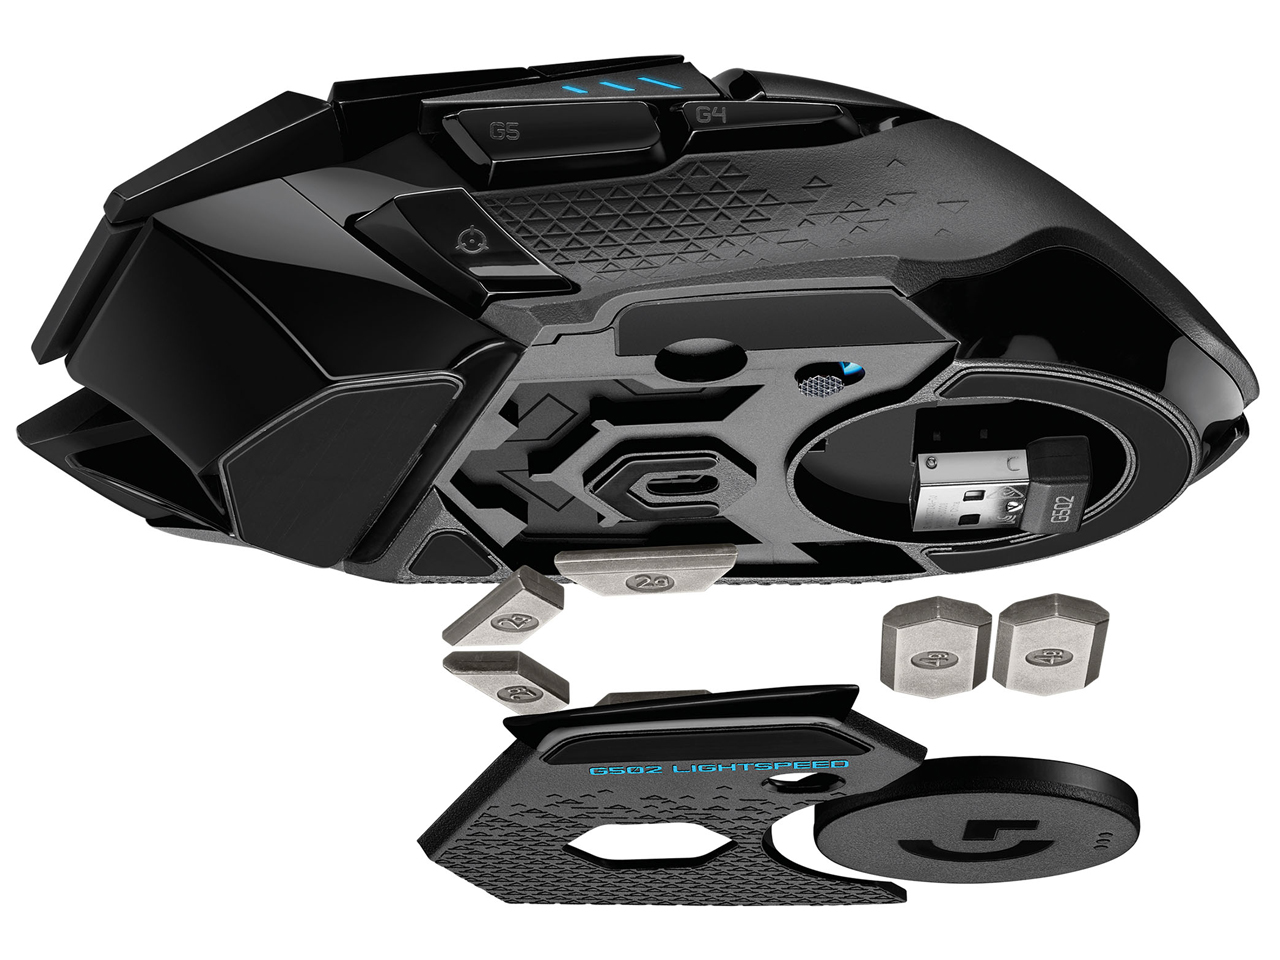 g502 lightspeed wireless gaming mouse